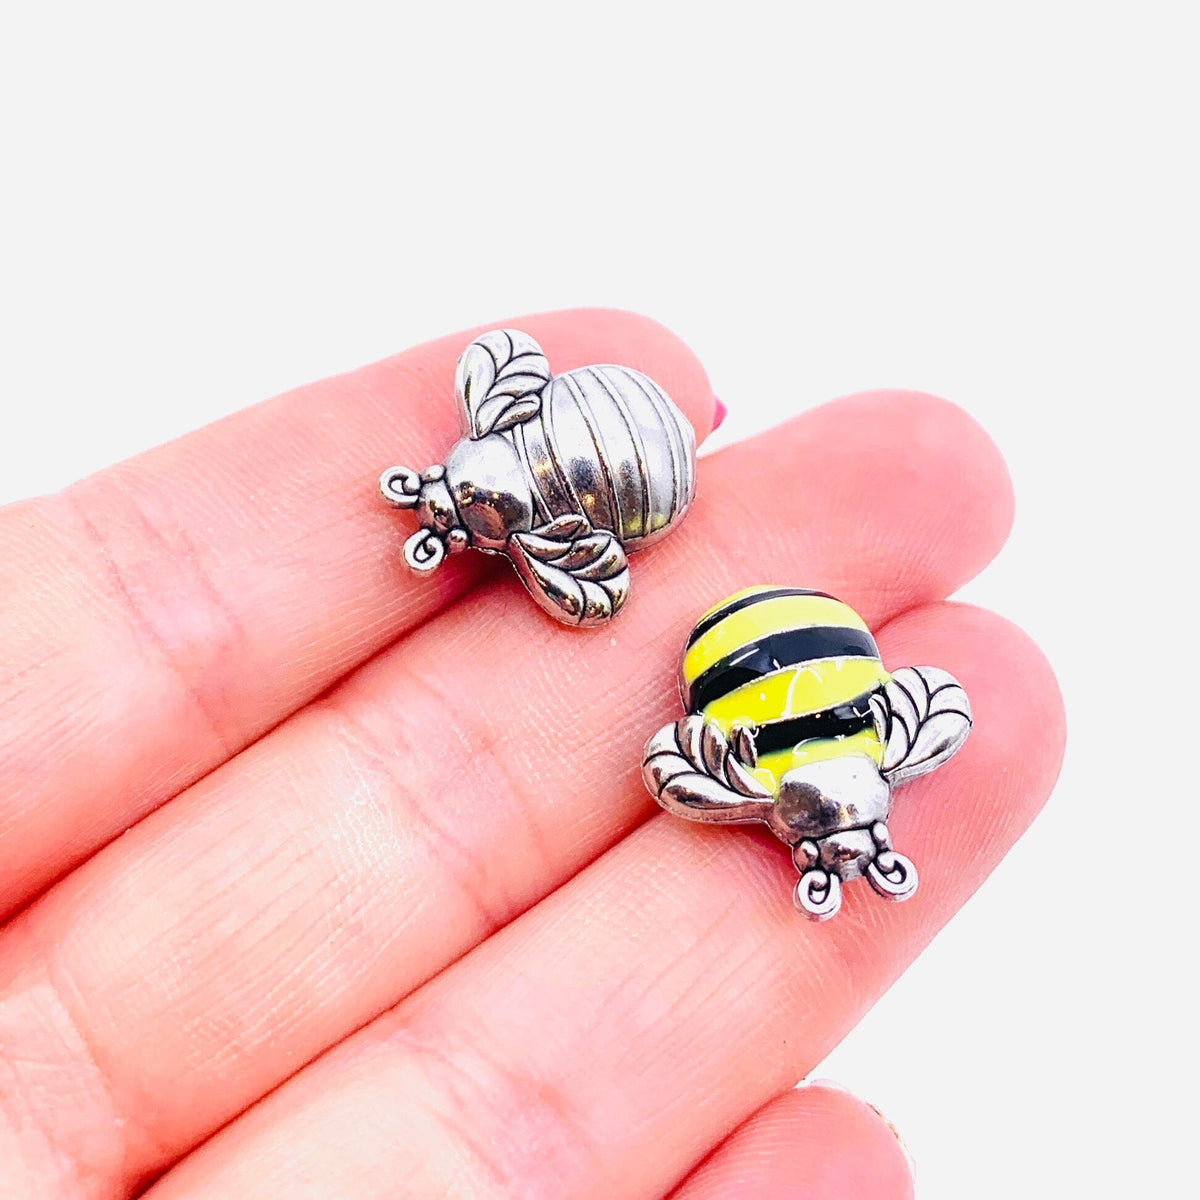 The Bumble Bee Cannot Fly Pocket Charm PT25 Miniature GANZ 